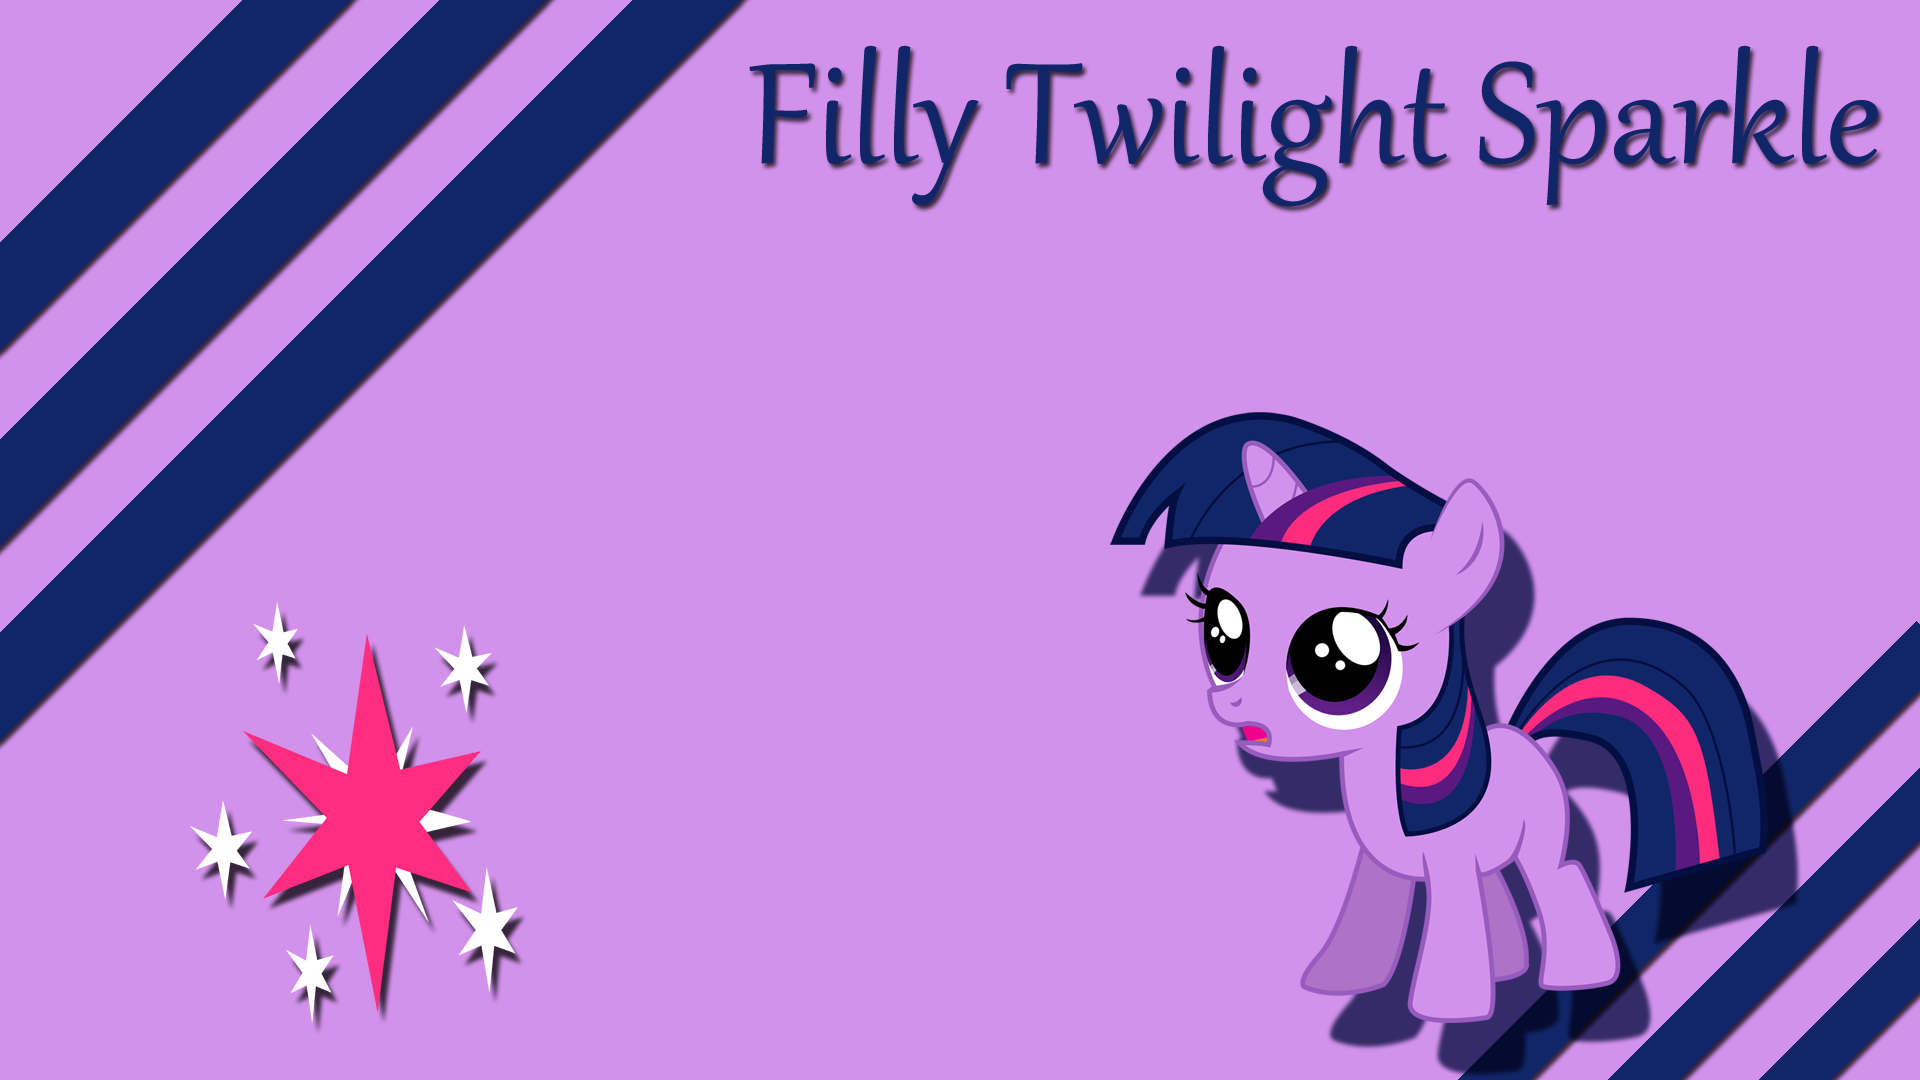 Filly Twilight Sparkle Wallpaper. 